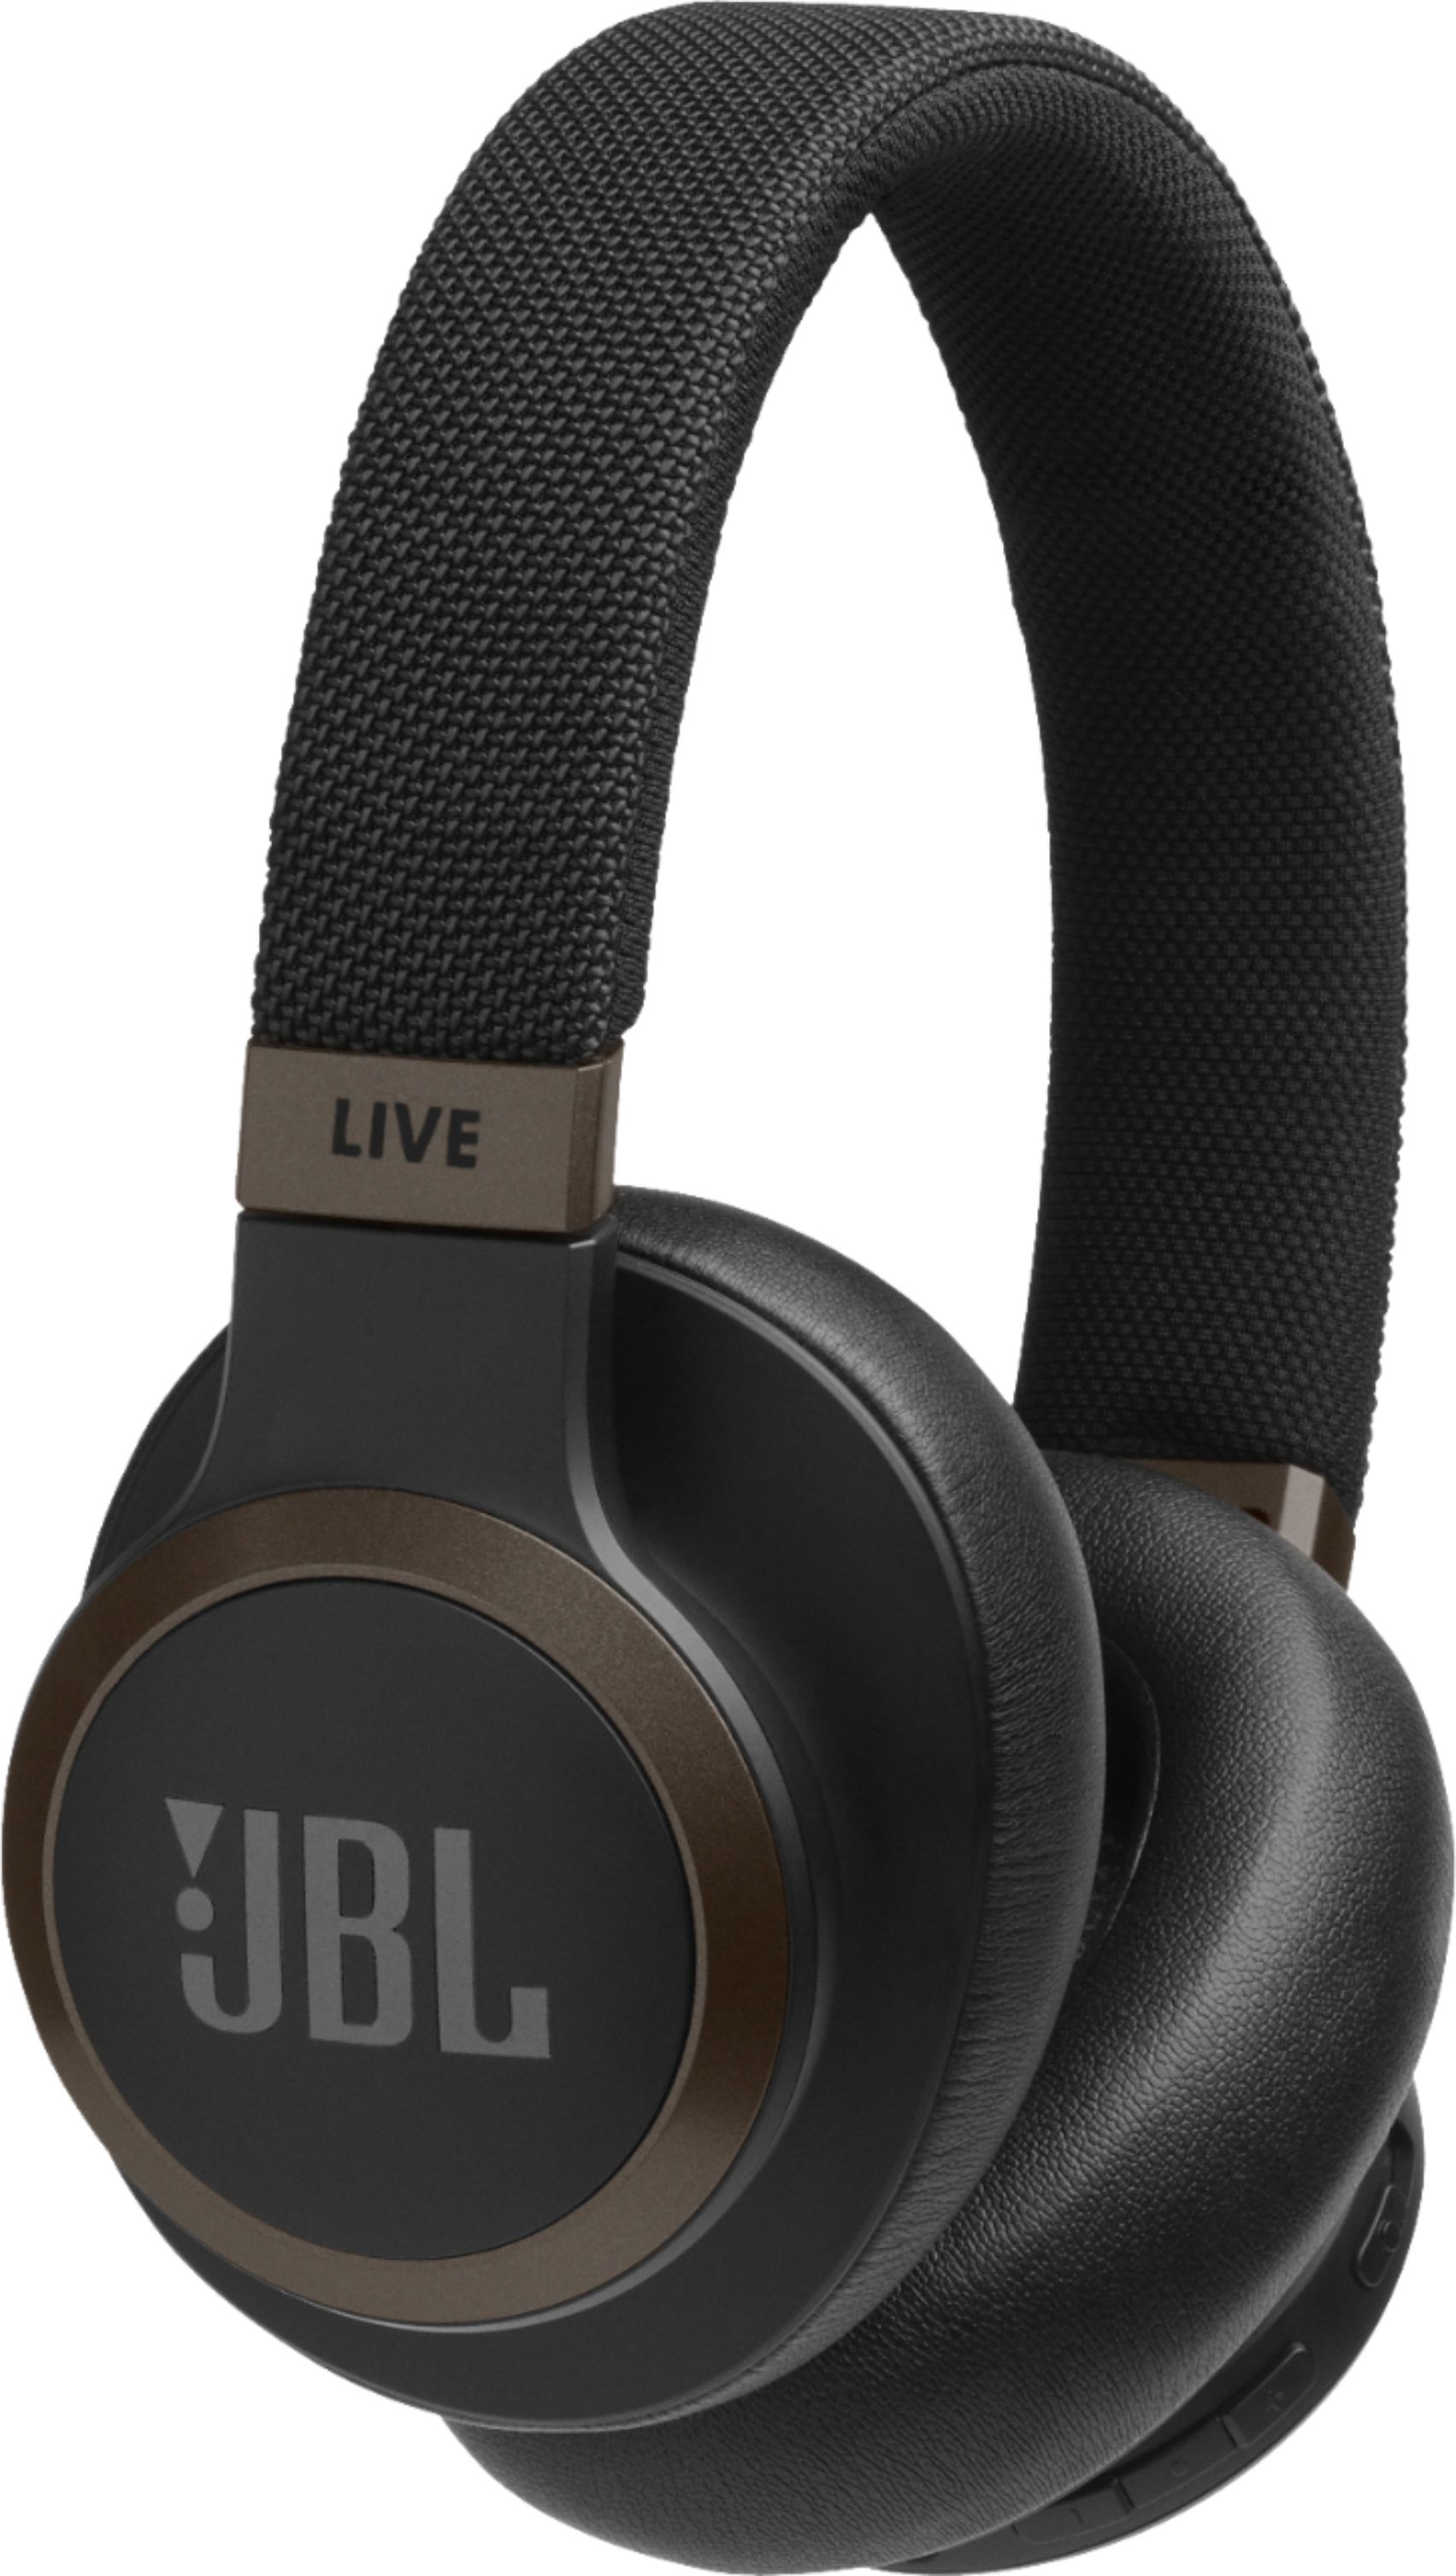 LIVE 650BTNC Wireless Noise Cancelling Over-the-Ear Headphones Black Best Buy